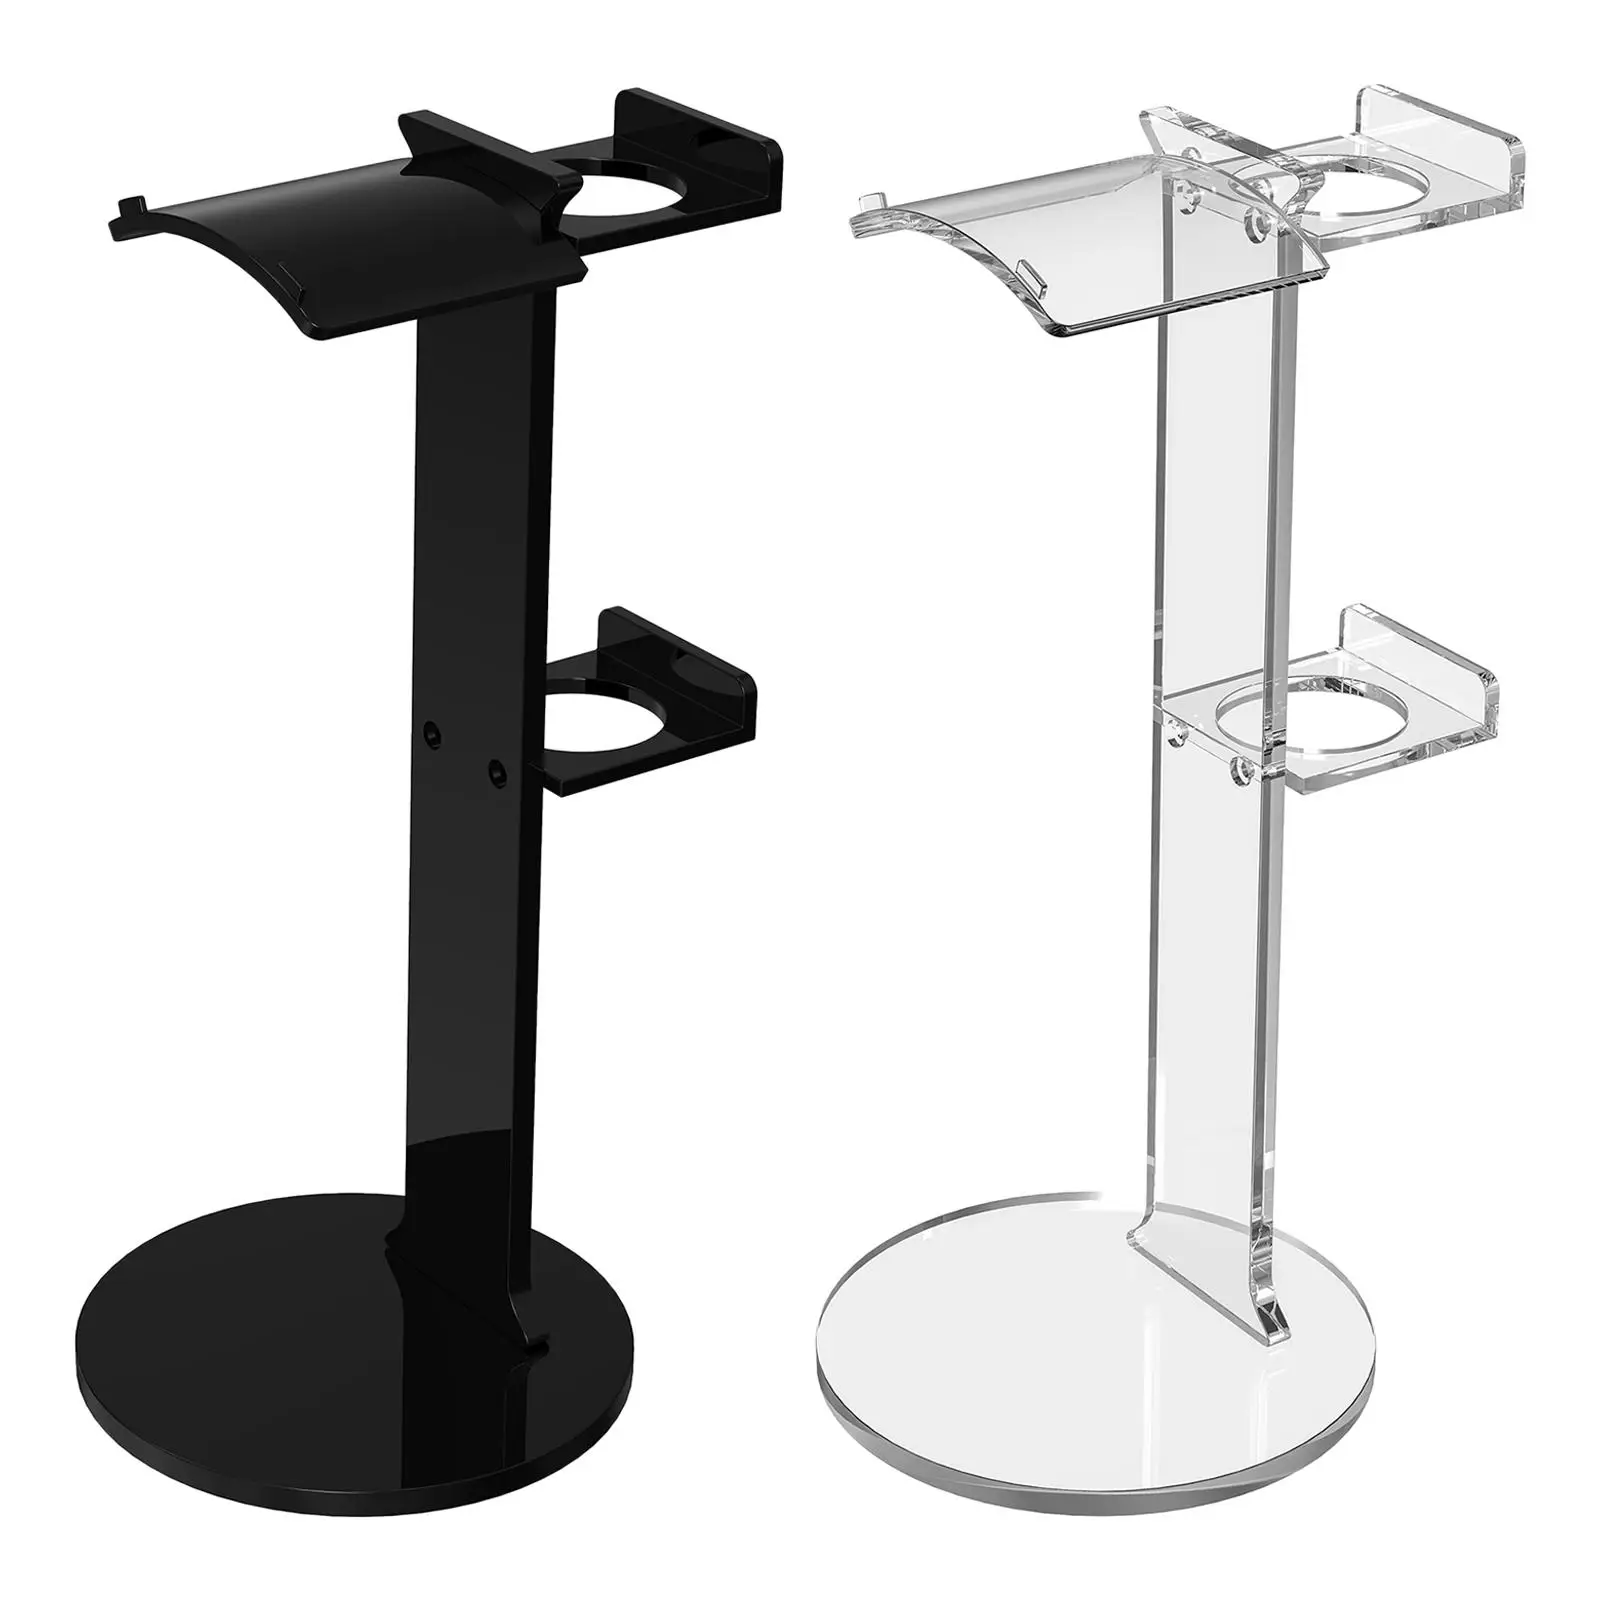 Tabletop VR Headset and Touch Controllers Display Stand Virtual Reality Devices Storage Rack Acrylic Holder for Quest Pro